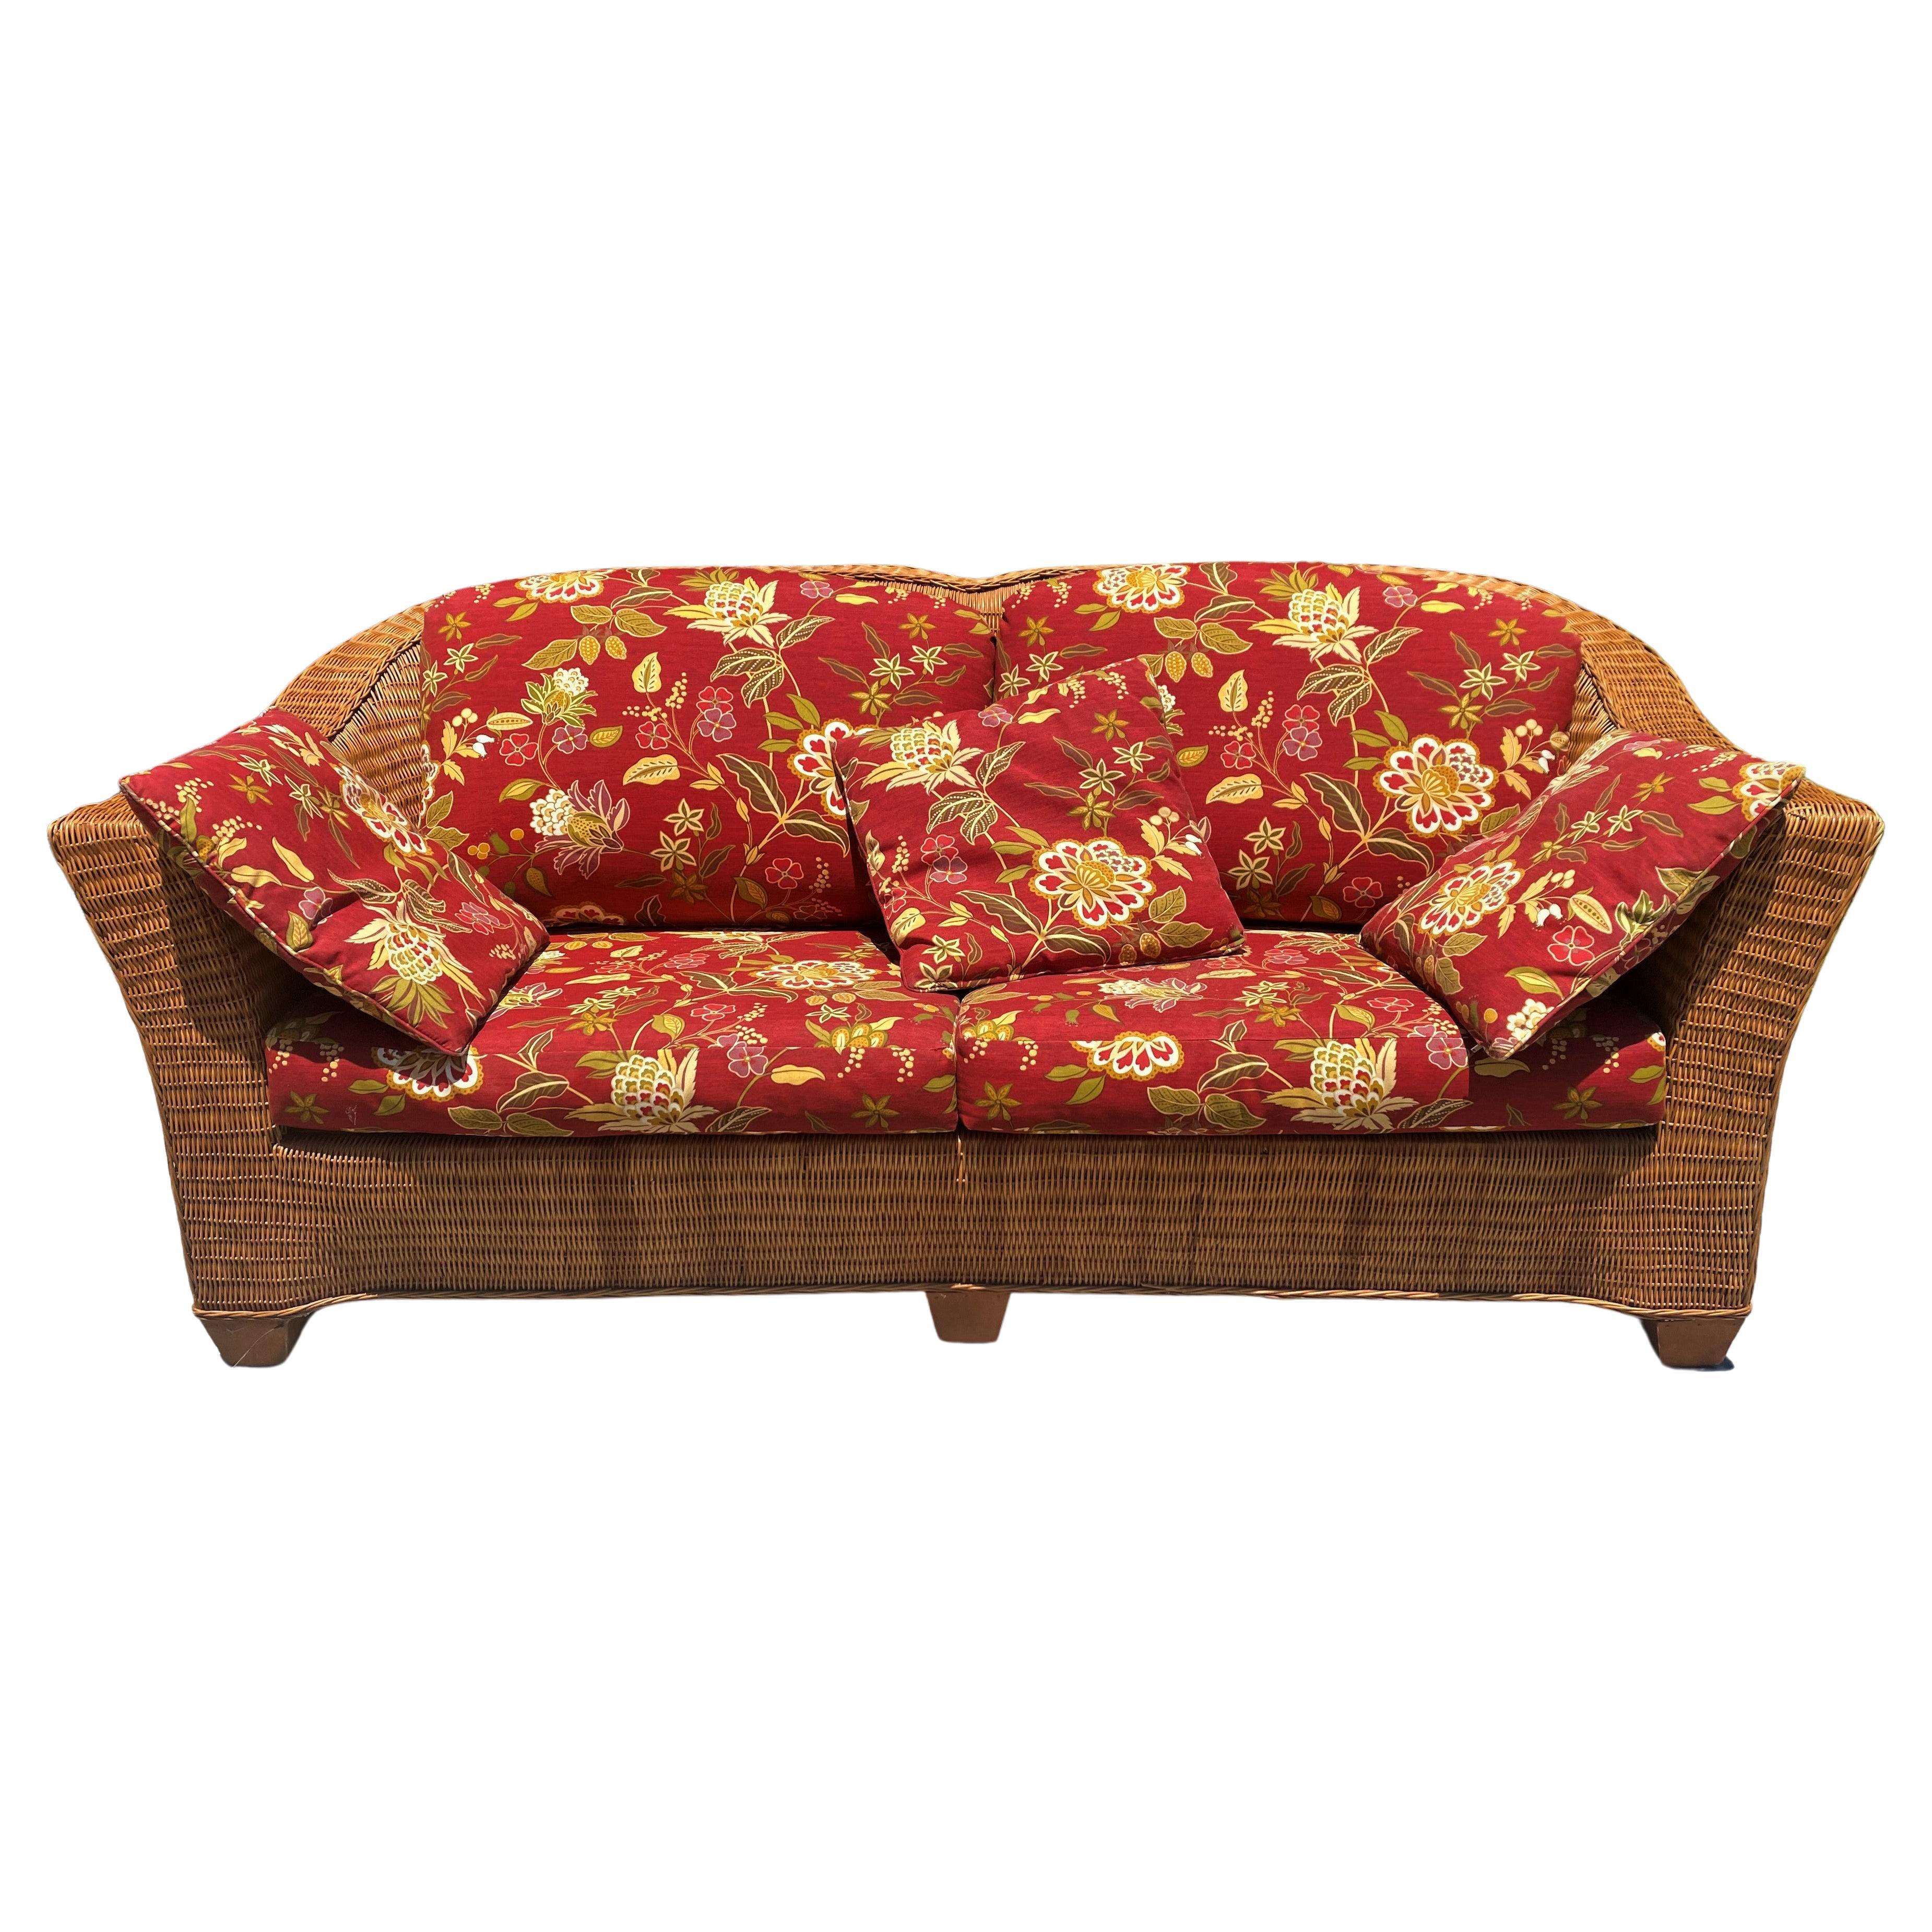 Modern Wicker Hump Back Red Floral Upholstered Loveseat For Sale